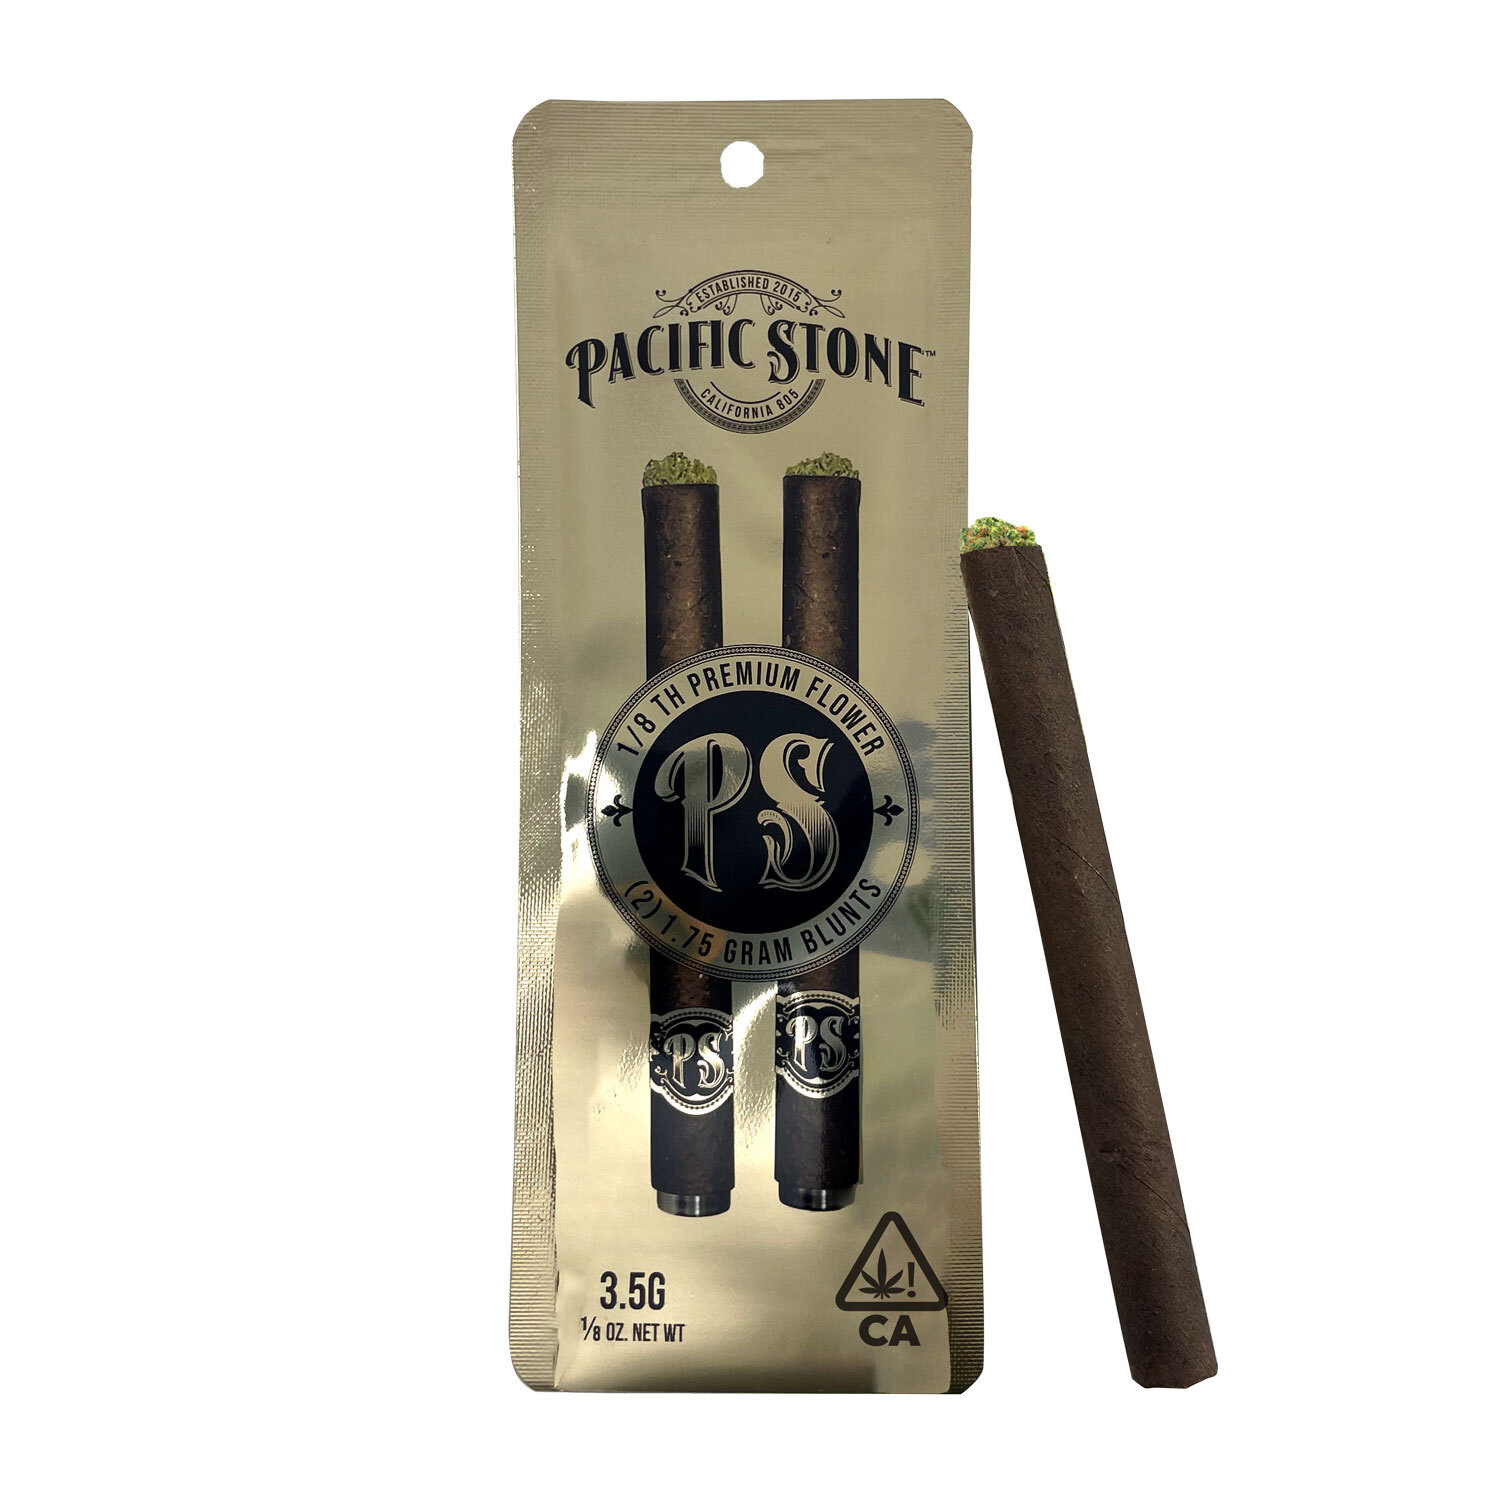 A photograph of Pacific Stone Blunt 1.75g Indica Wedding Cake 2-Pack 3.5g